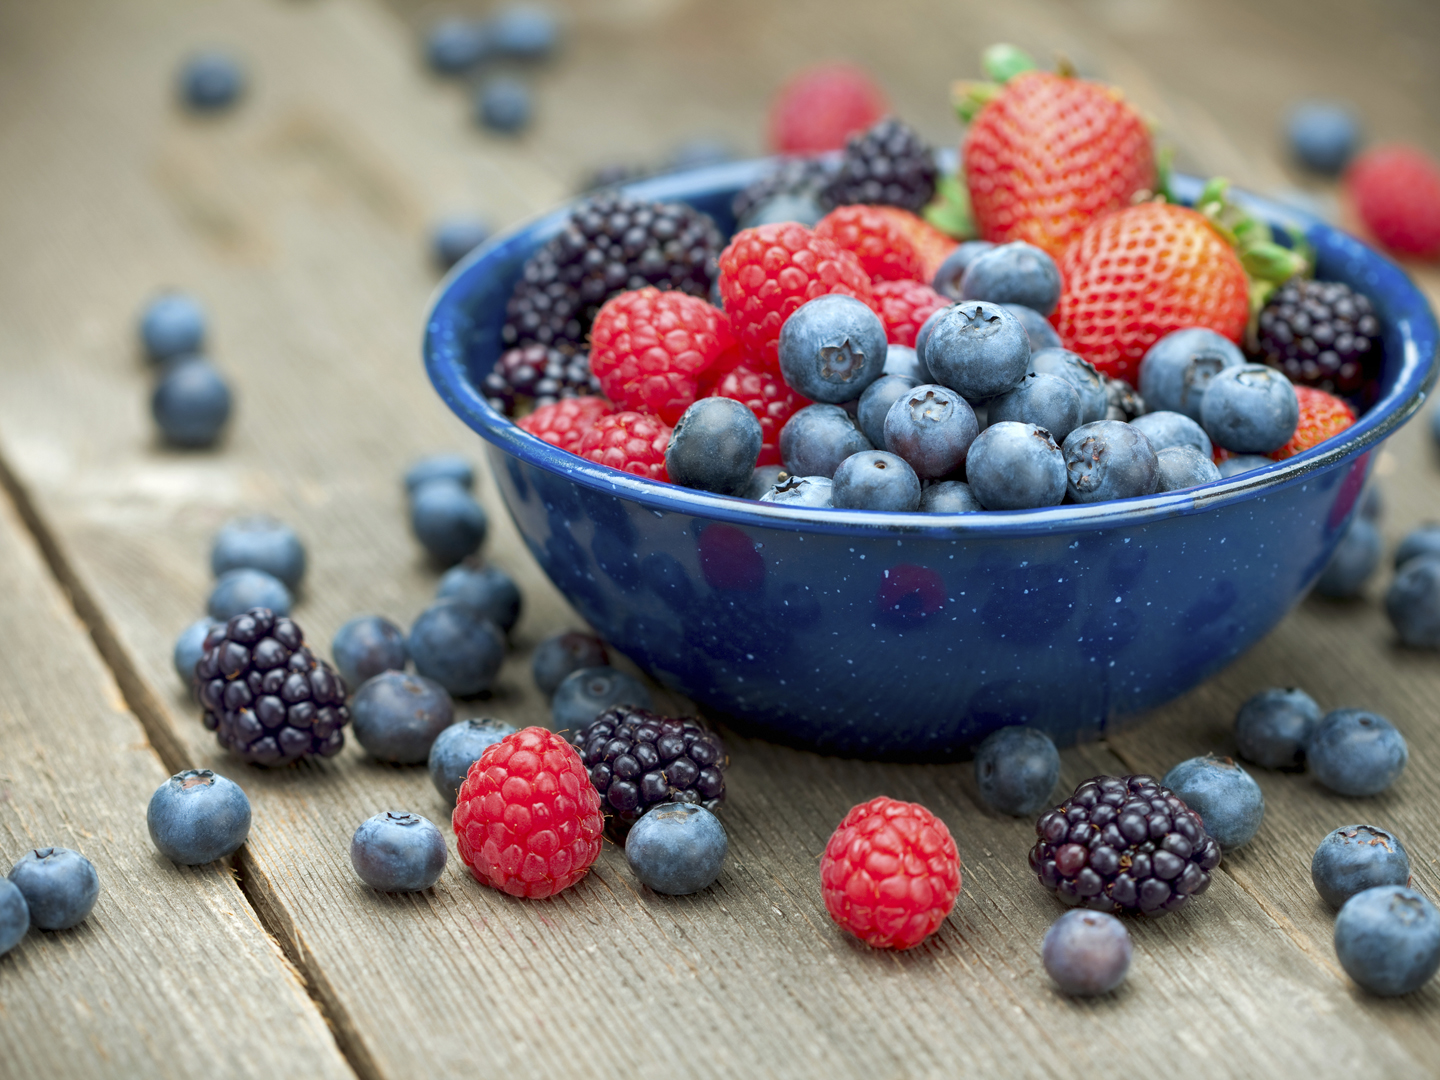 A bowlful of delicious organic berries.  Strawberries, blackberries, blueberries and raspberries.